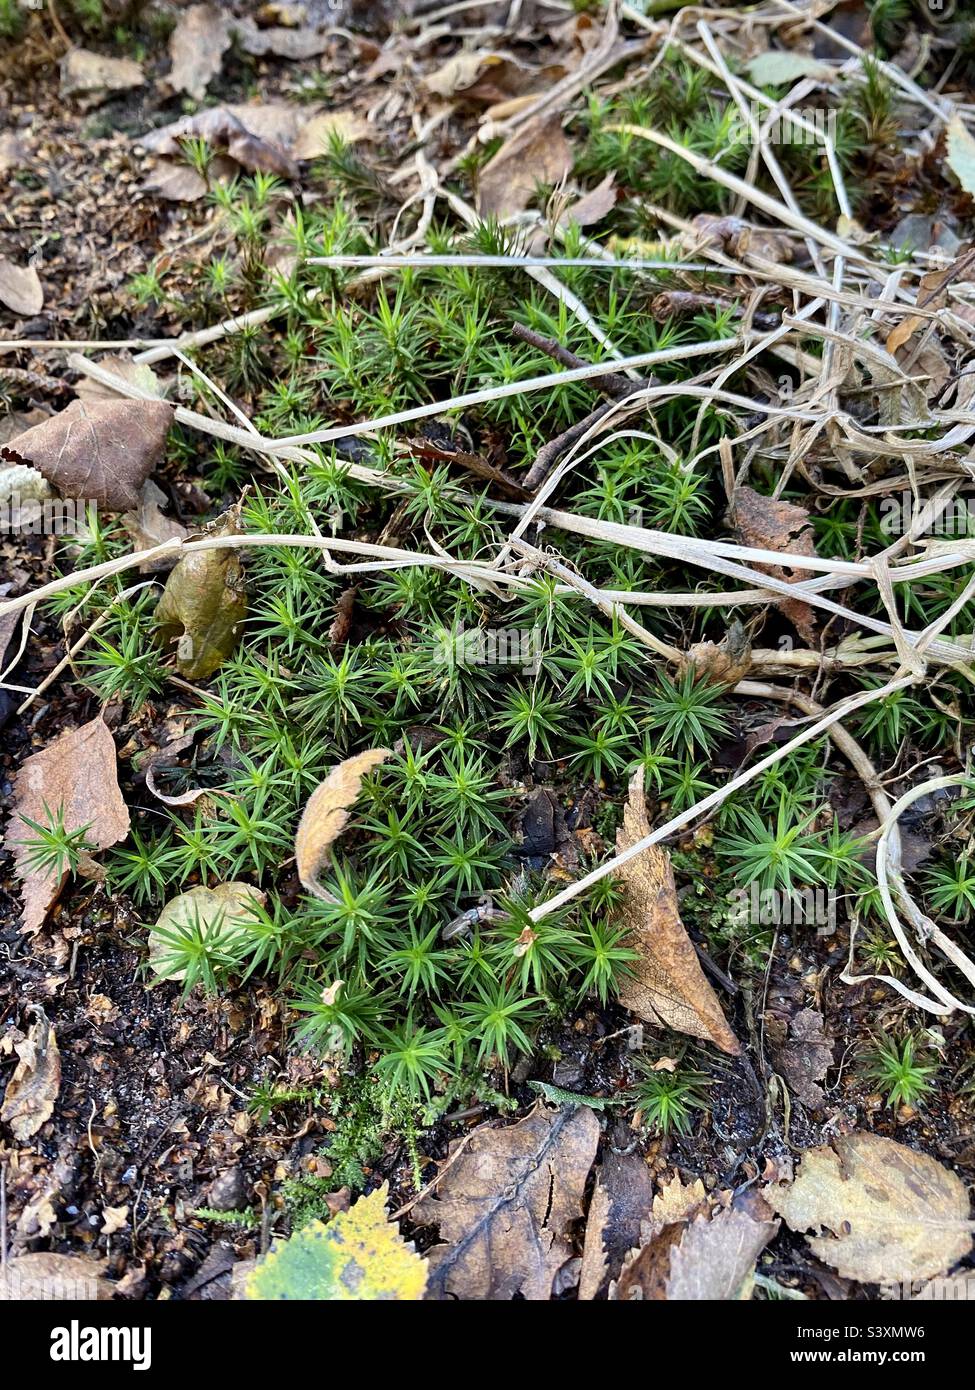 Polytrichum formosum - Bank Haircap moss. Star shaped formations growing on the first floor. Stock Photo